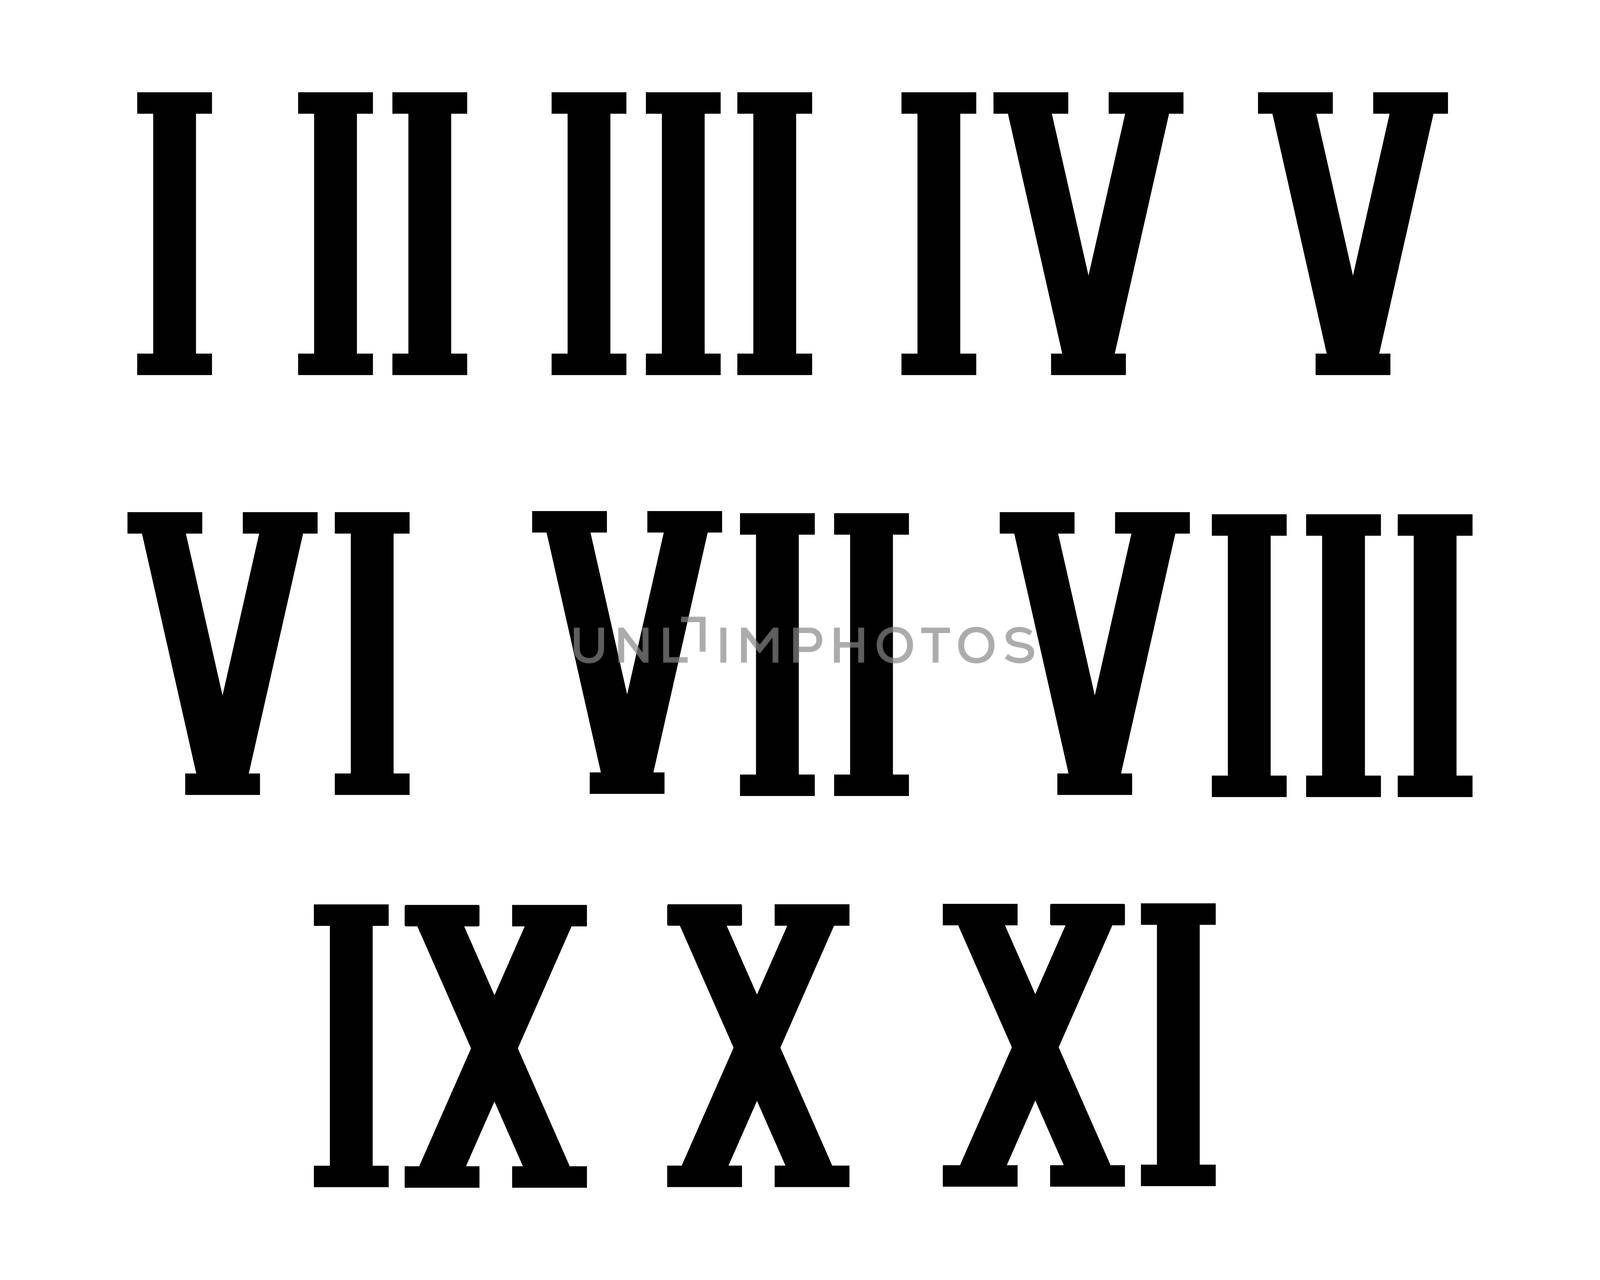 Roman numerals set isolated on white background by Alxyzt